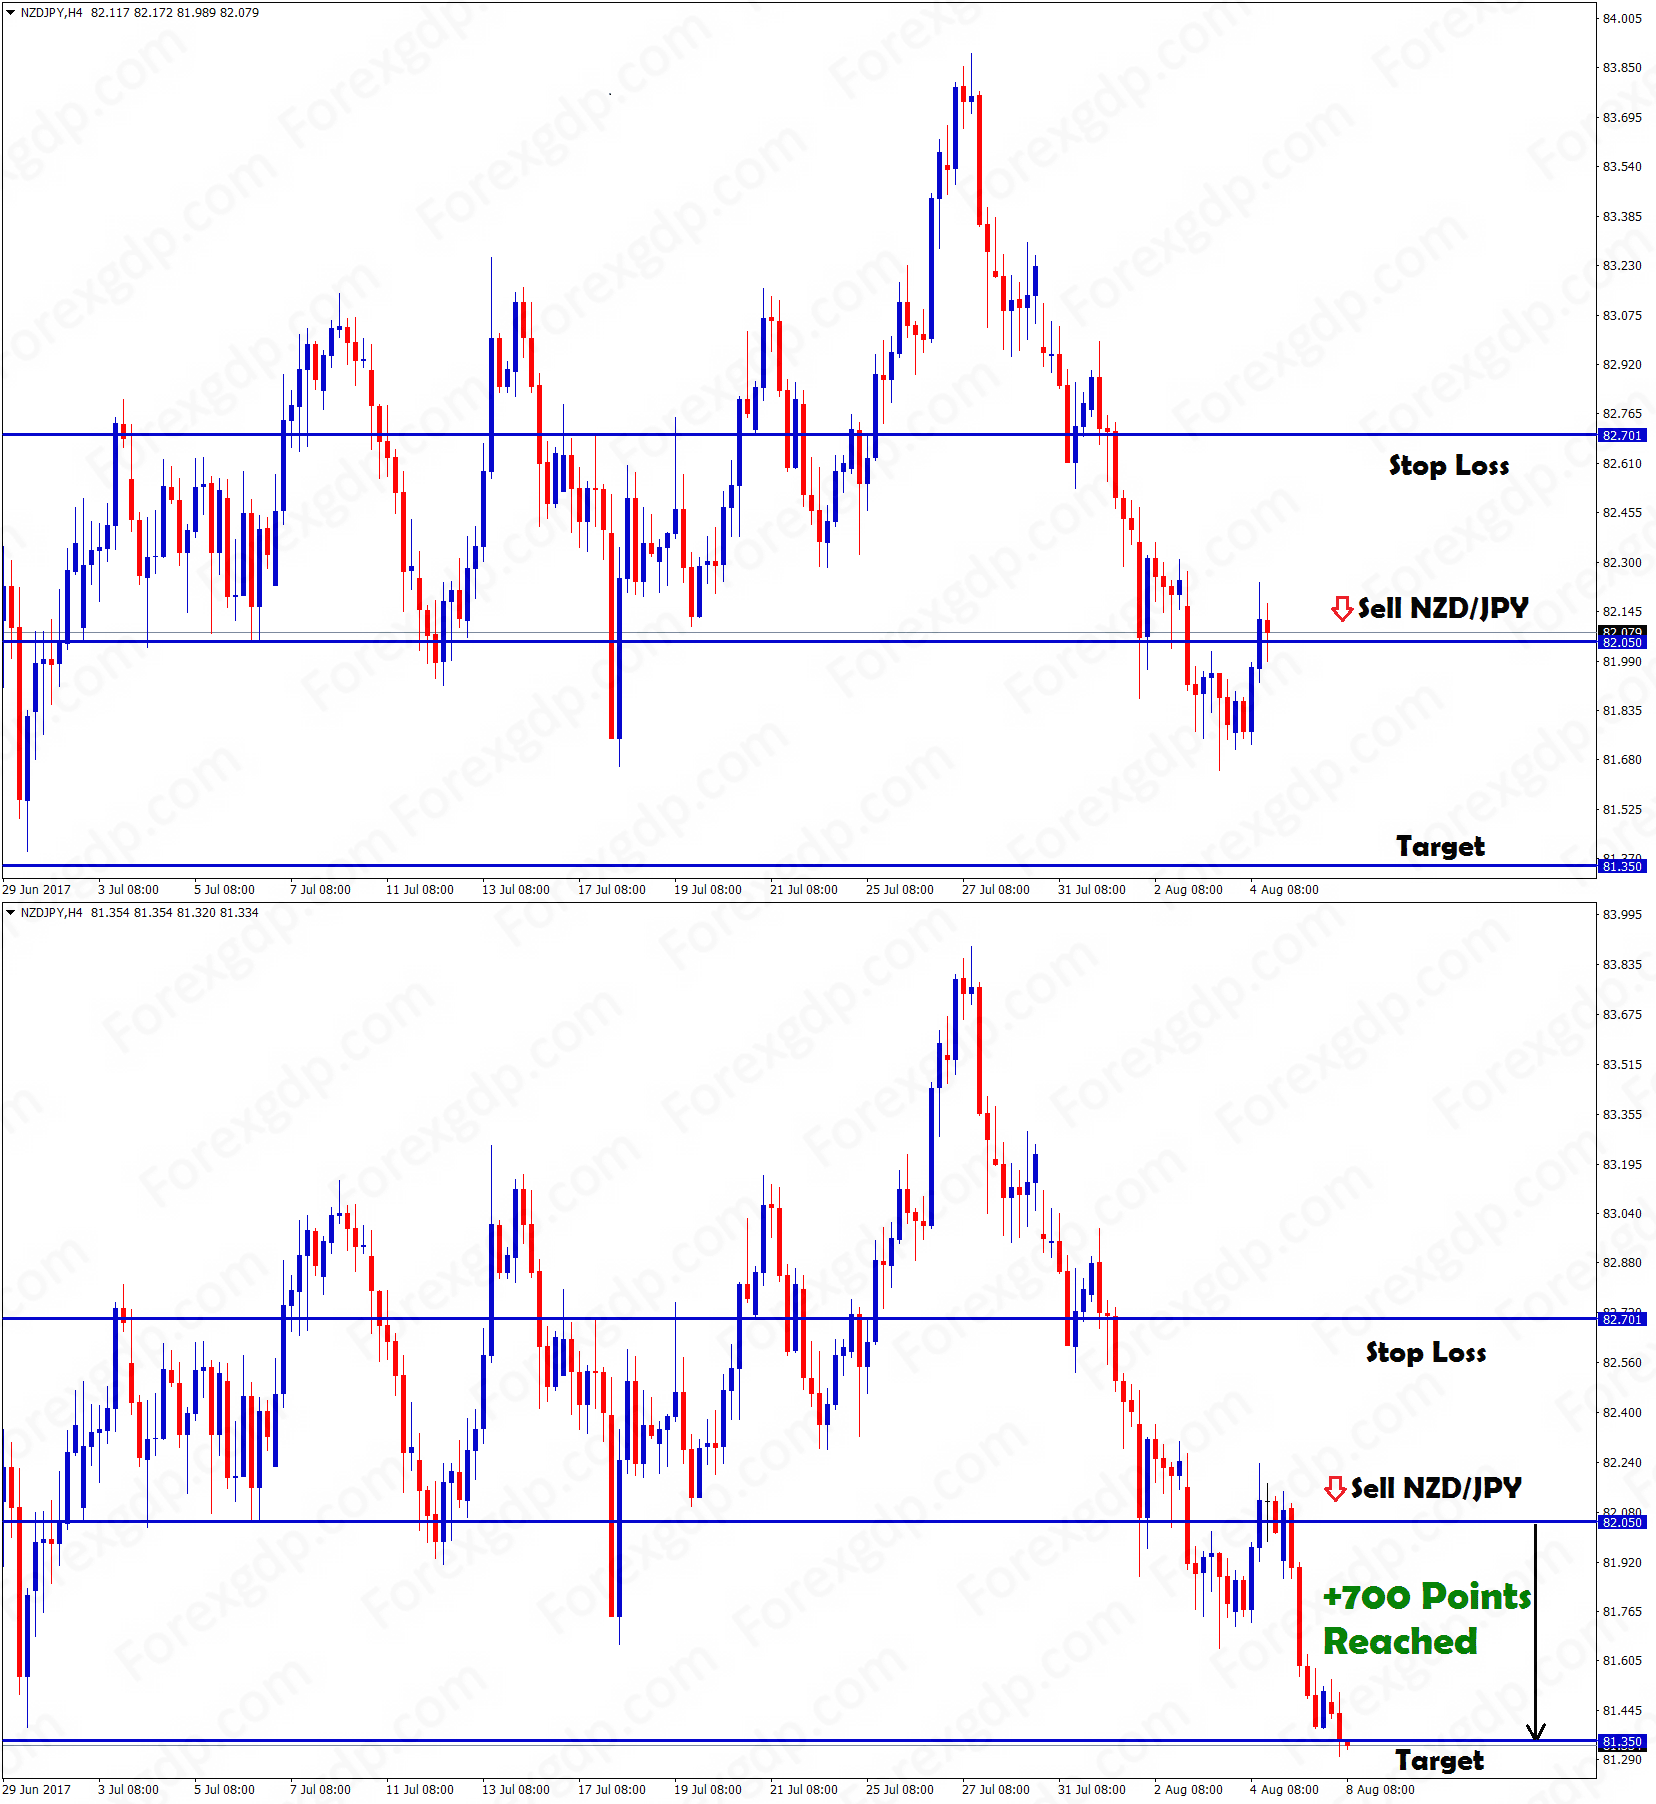 NZDJPY sell trade at 700 points target